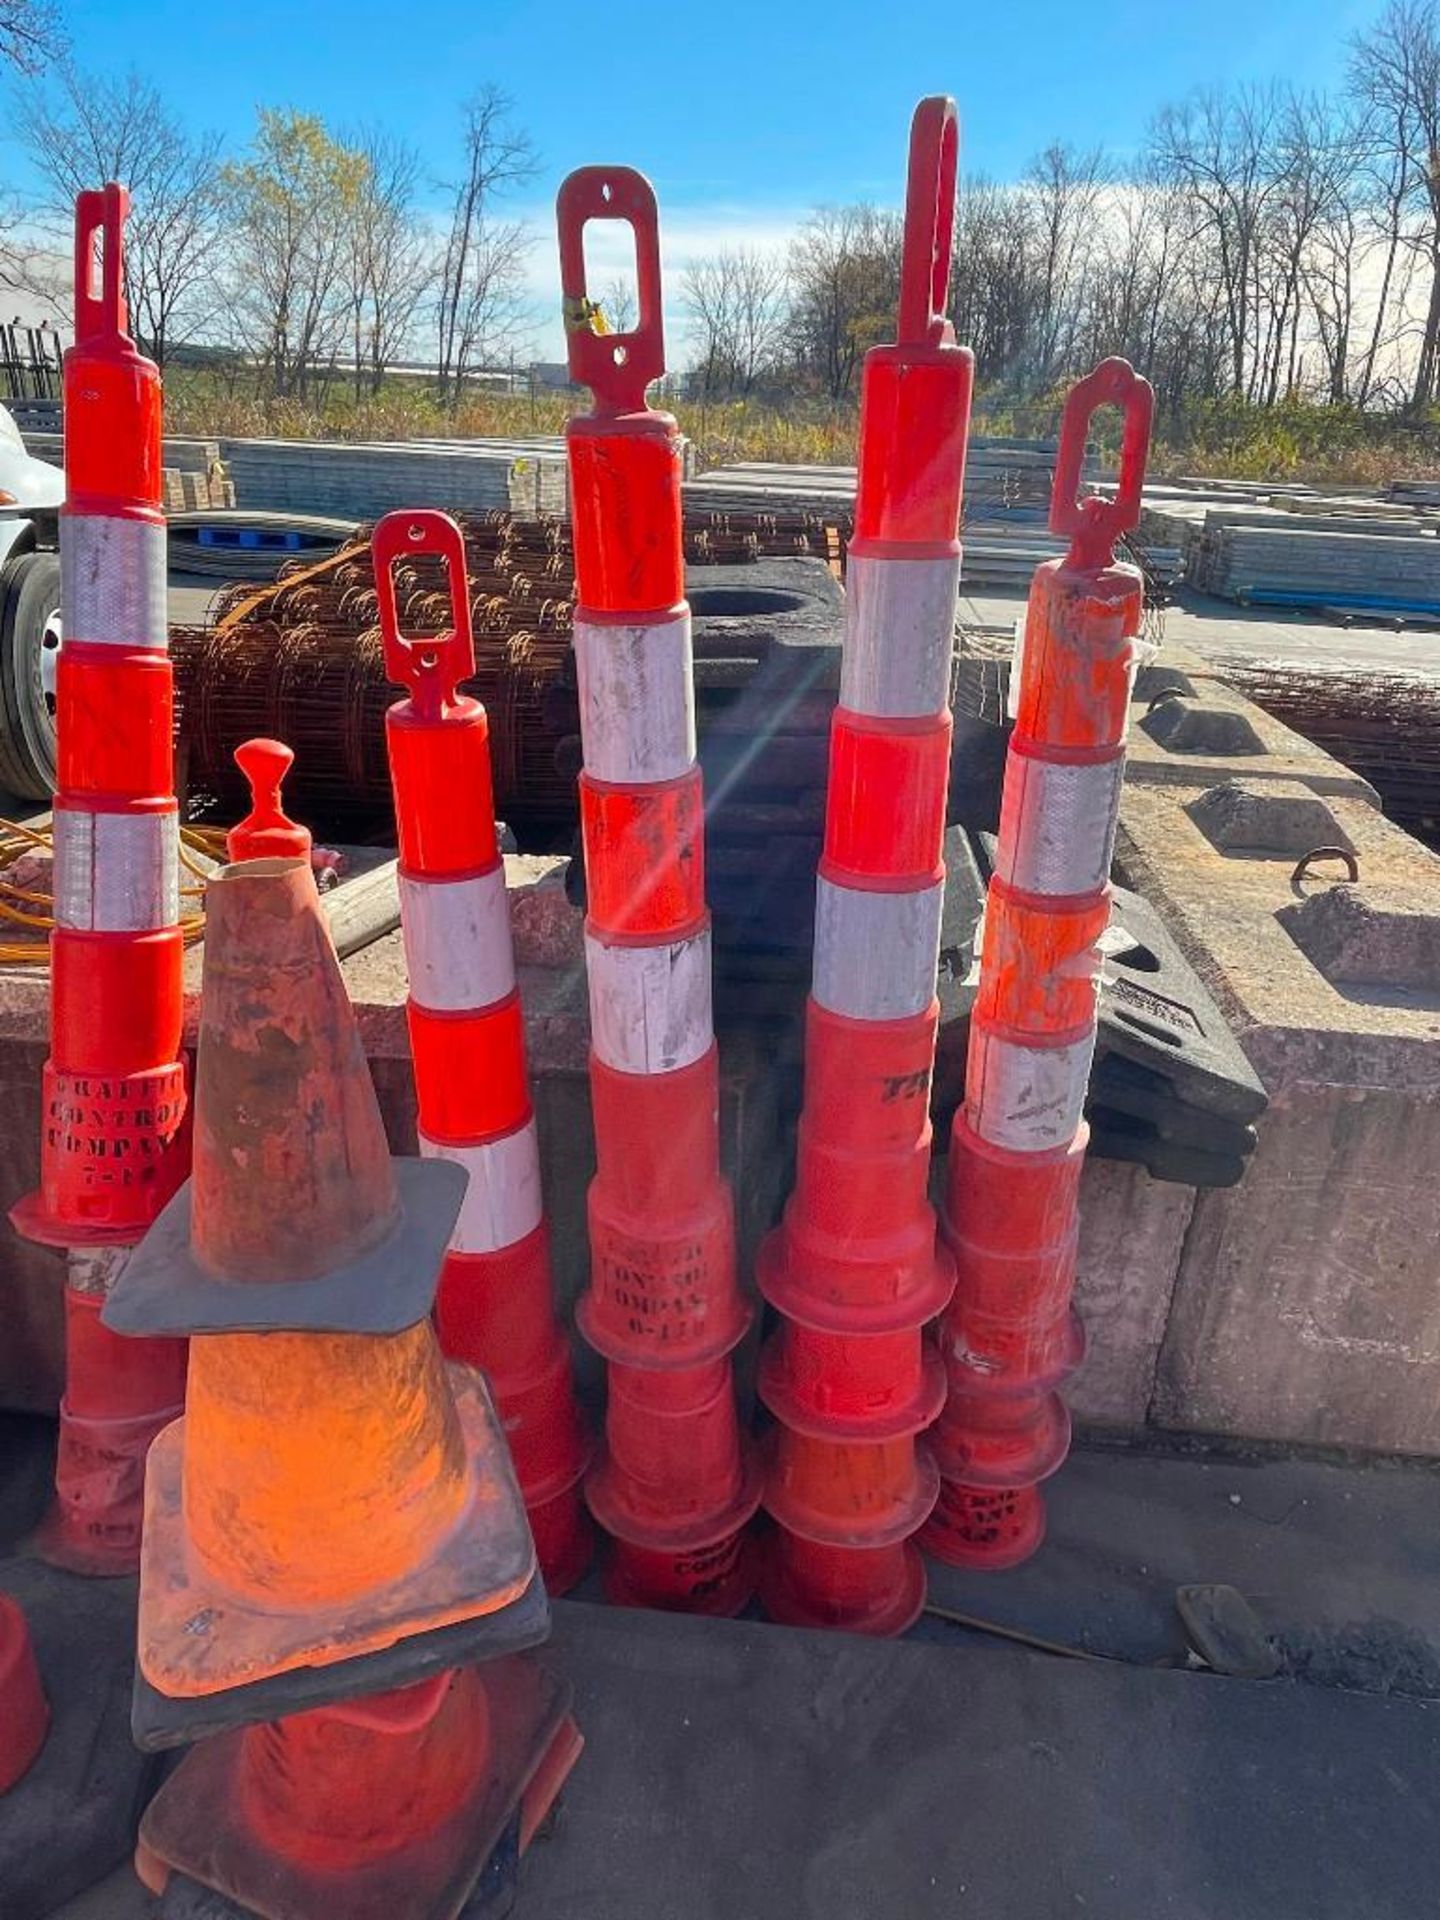 Traffic Construction Cones. Located in Hazelwood, MO - Image 3 of 5